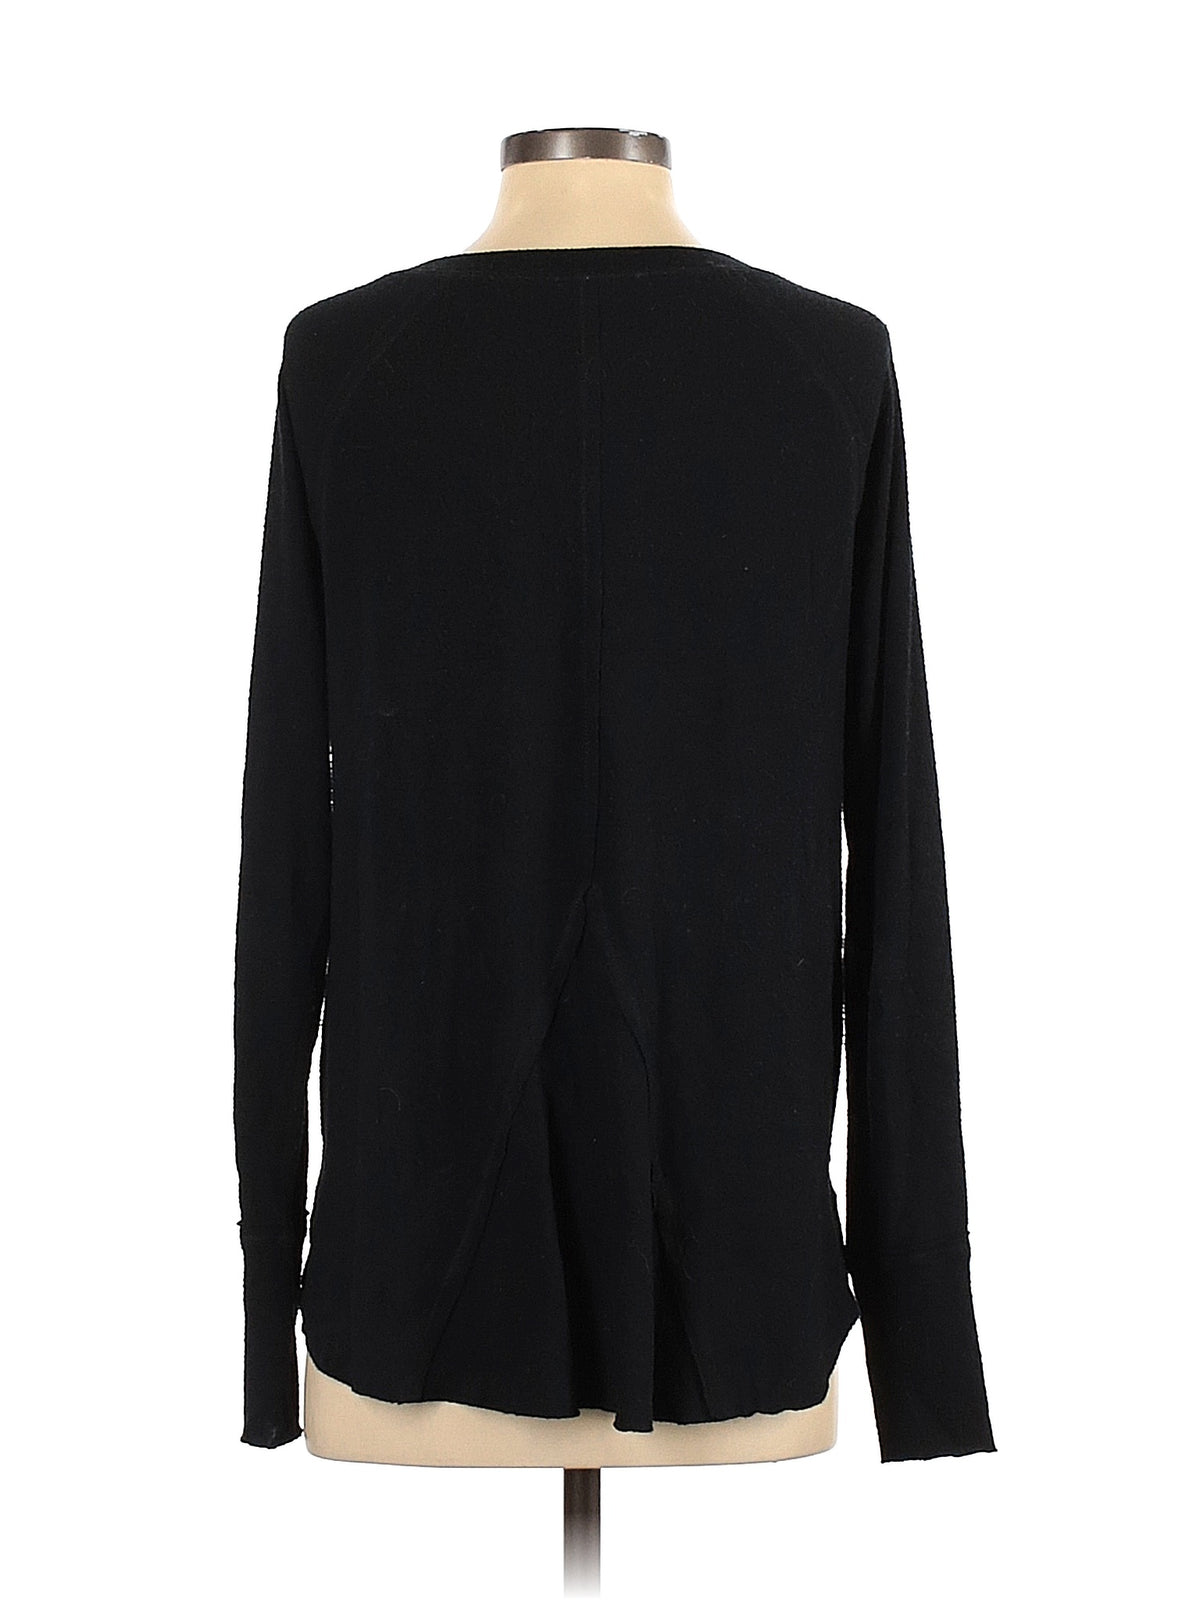 Long Sleeve Top size - XS